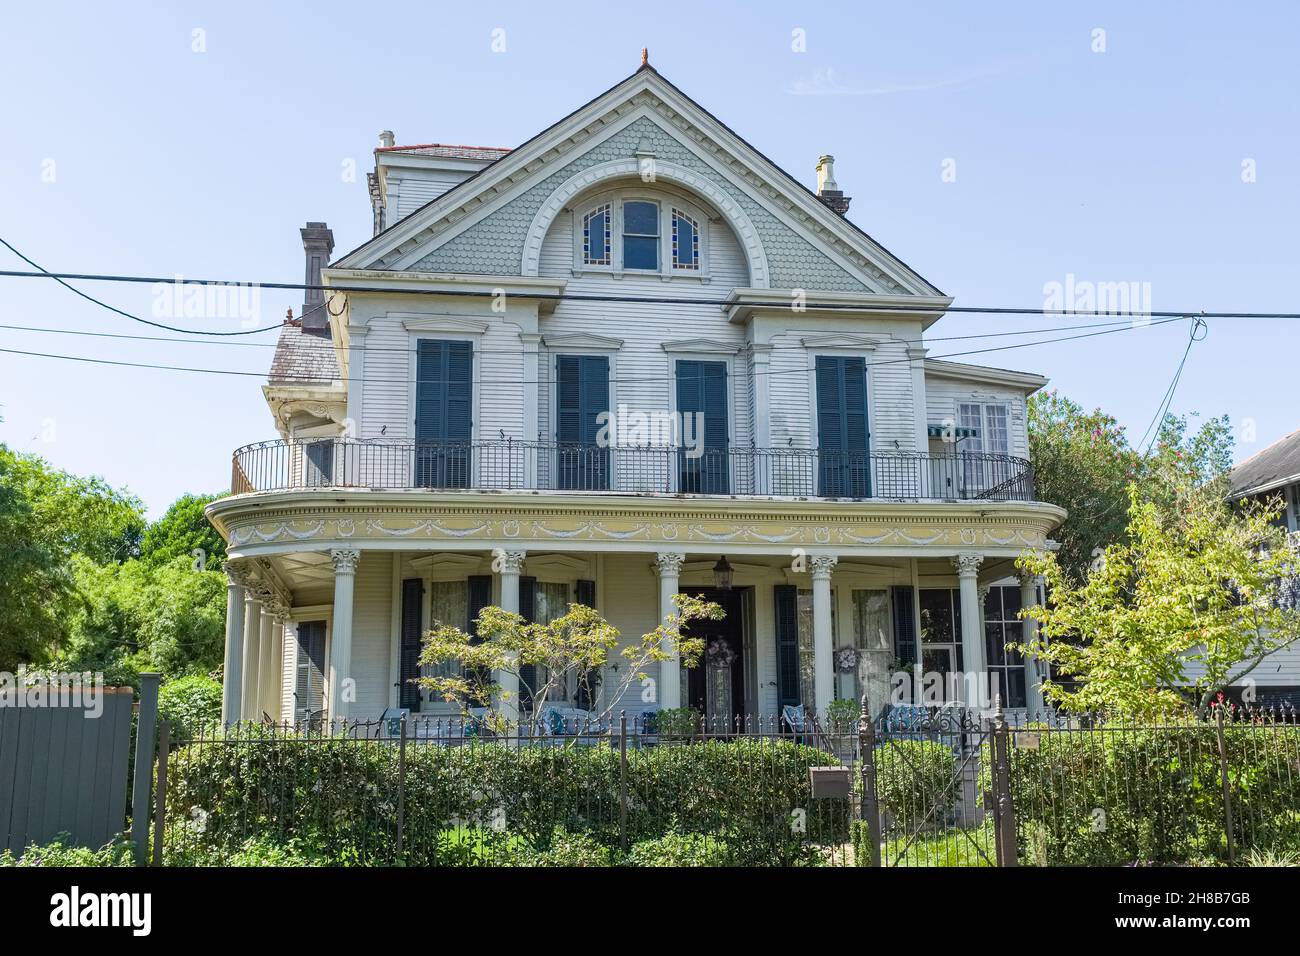 NEW ORLEANS, LA, USA - SEPTEMBER 6, 2020: Large Victorian house on Prytania Street Stock Photo